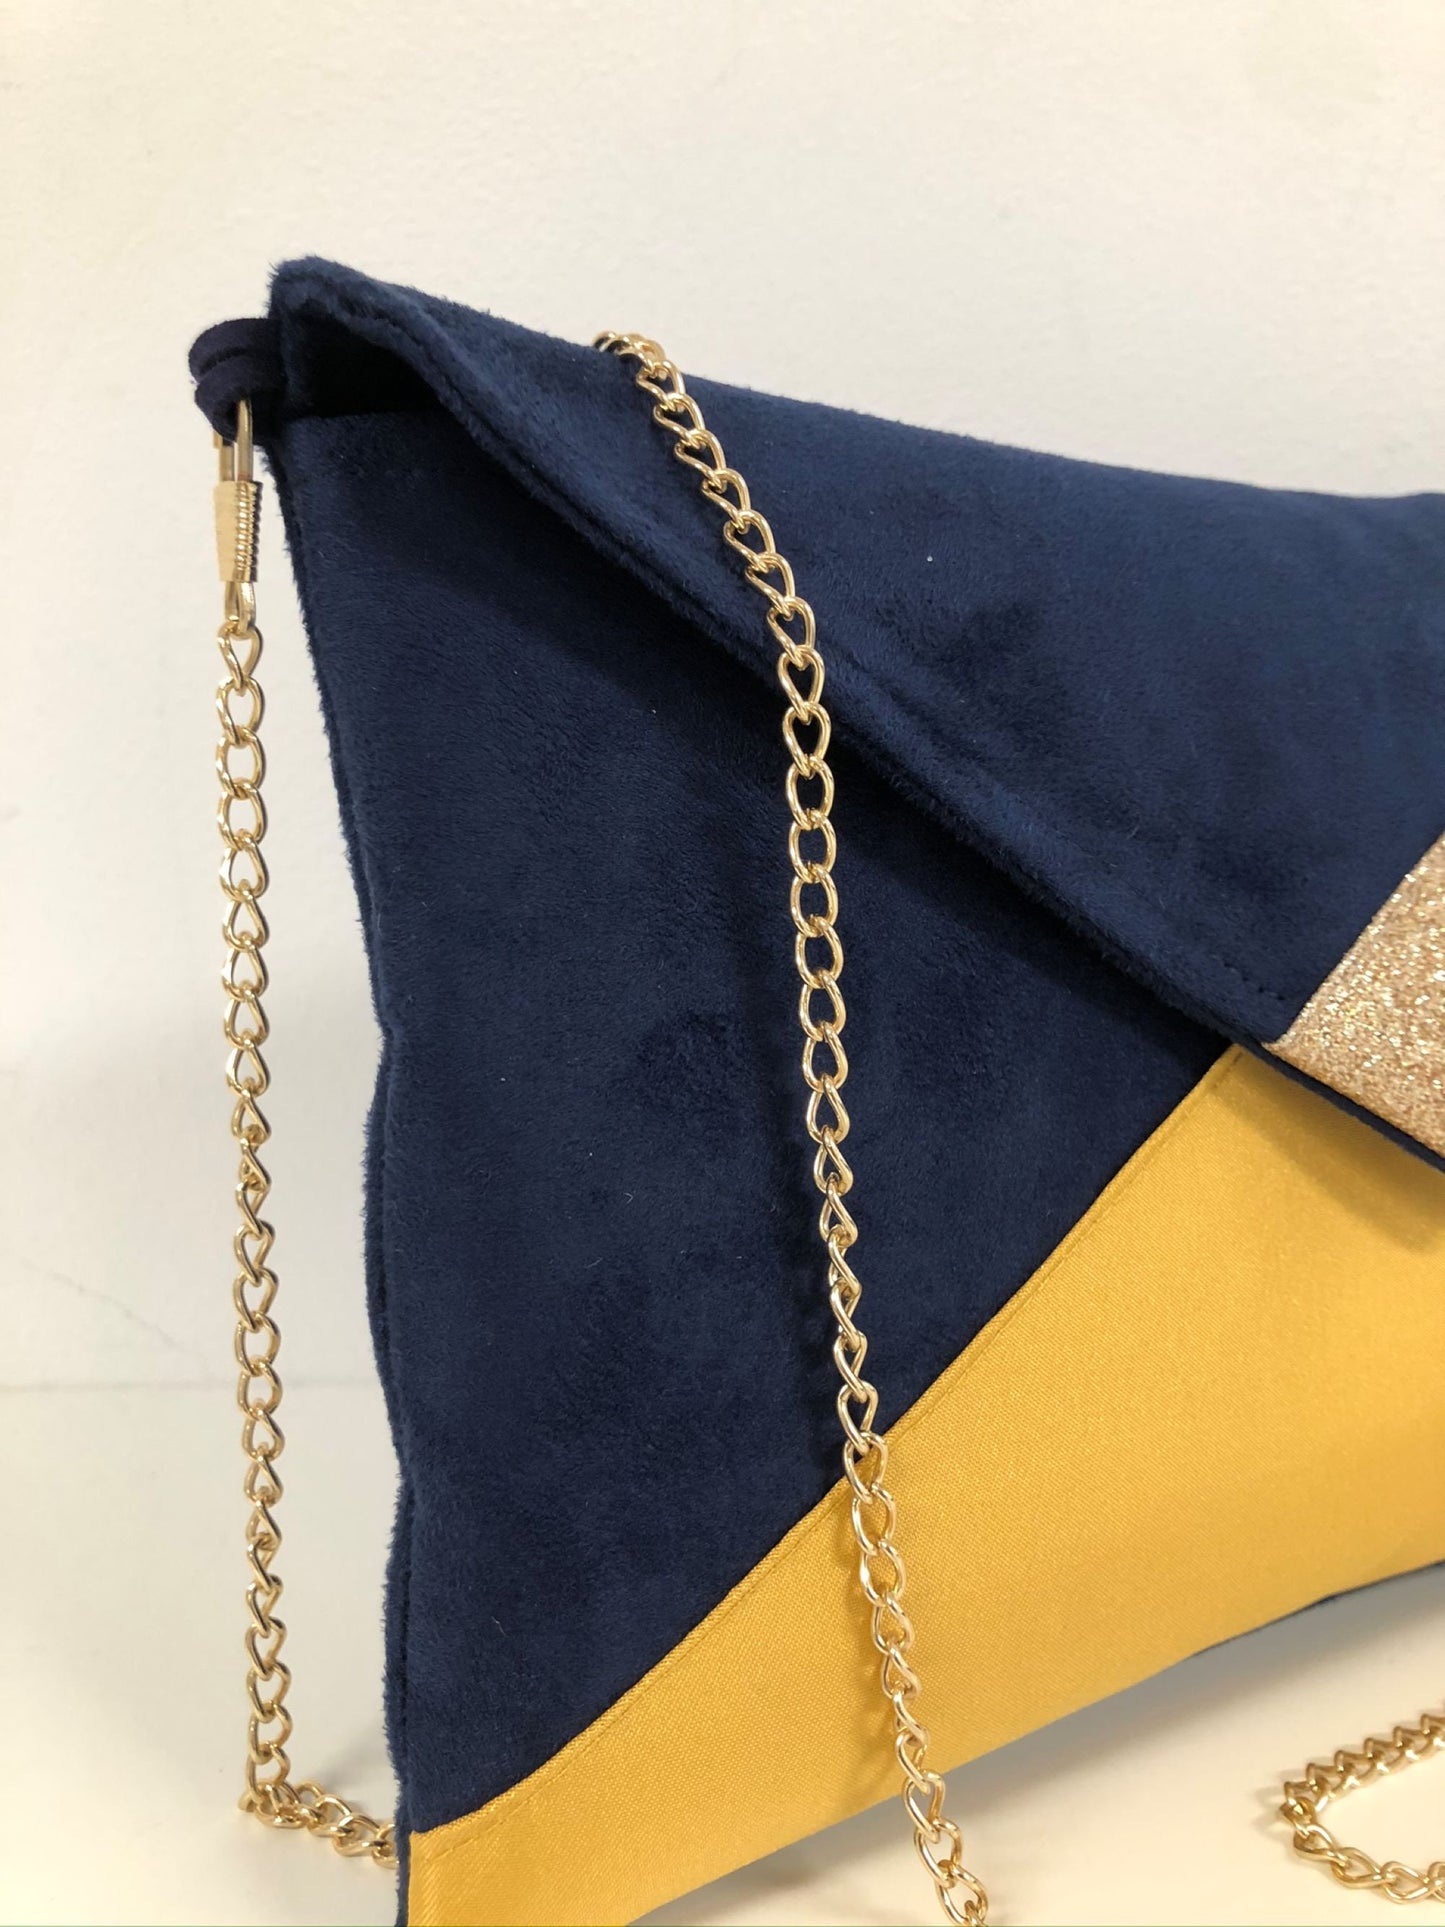 Navy blue and mustard yellow Isa clutch bag with gold sequins